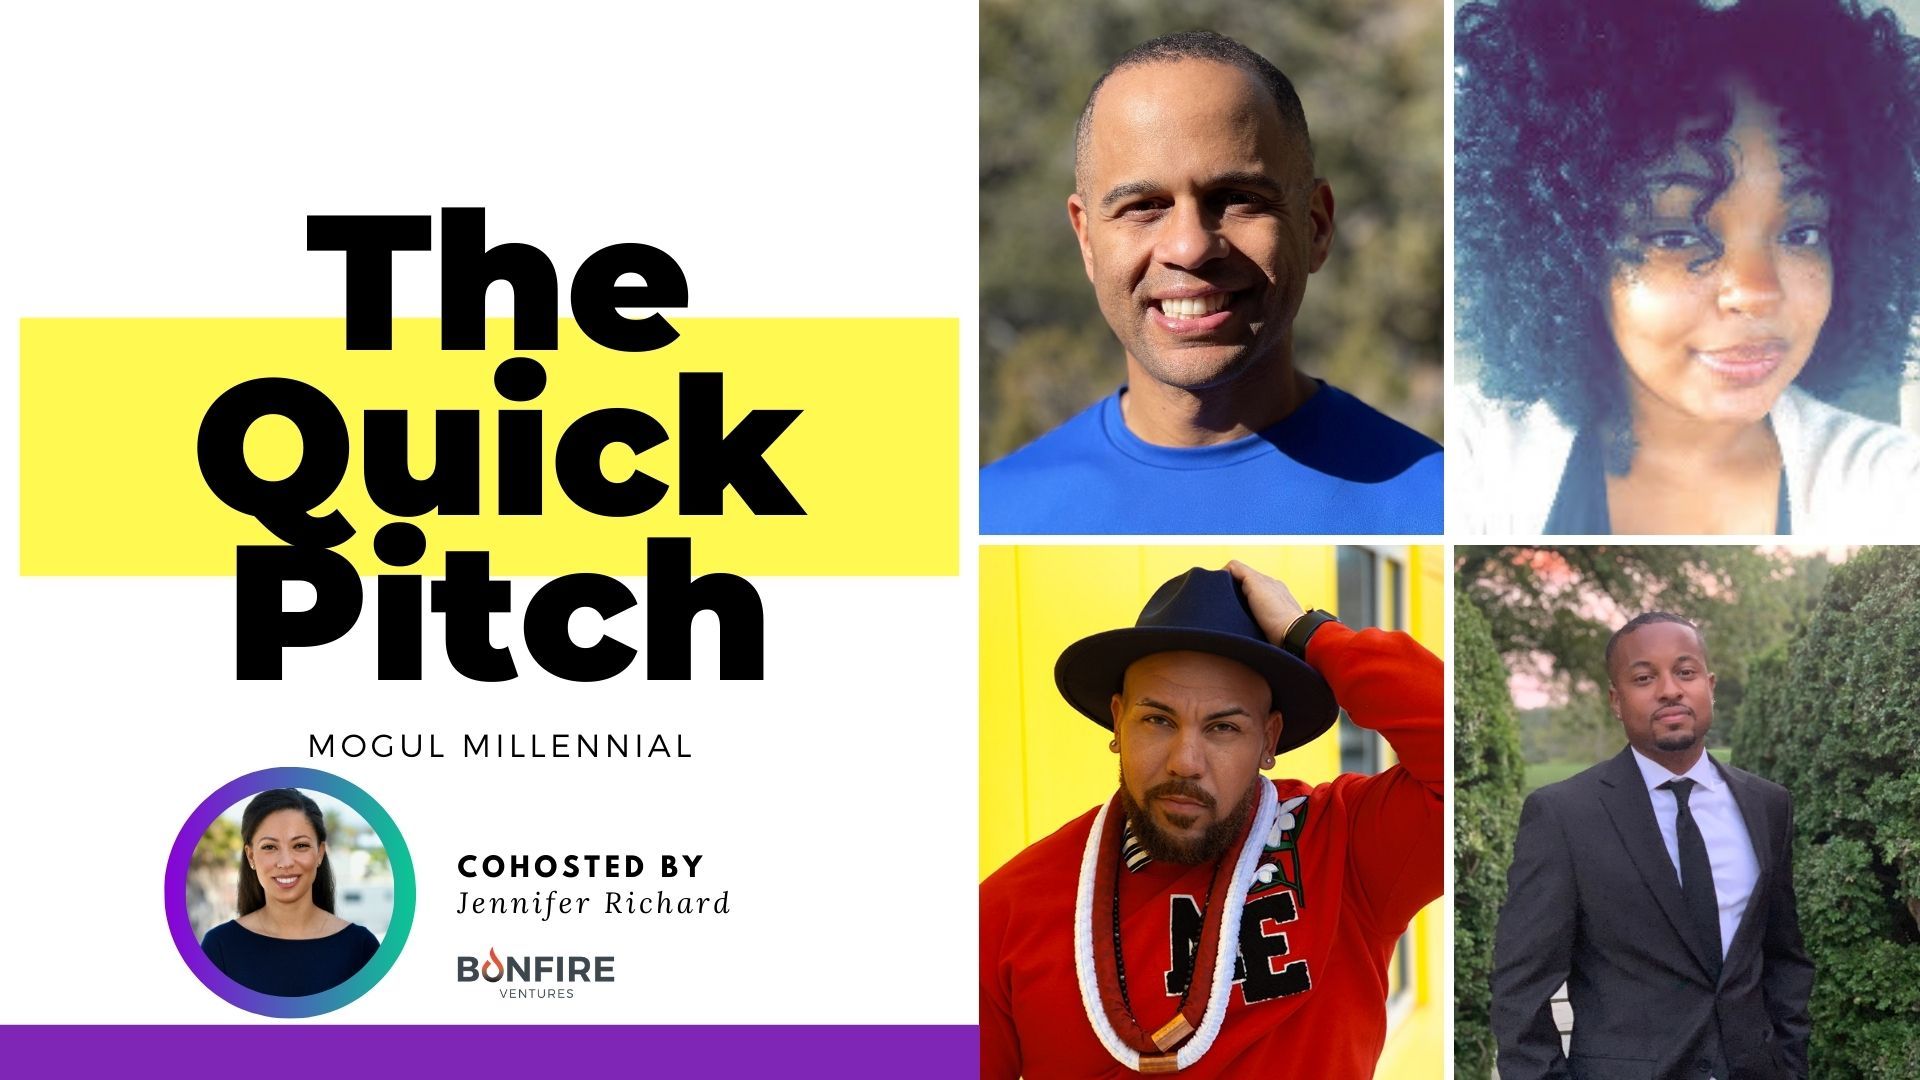 [Watch] Black founders practice their pitch with Jennifer Richard of Bonfire Ventures